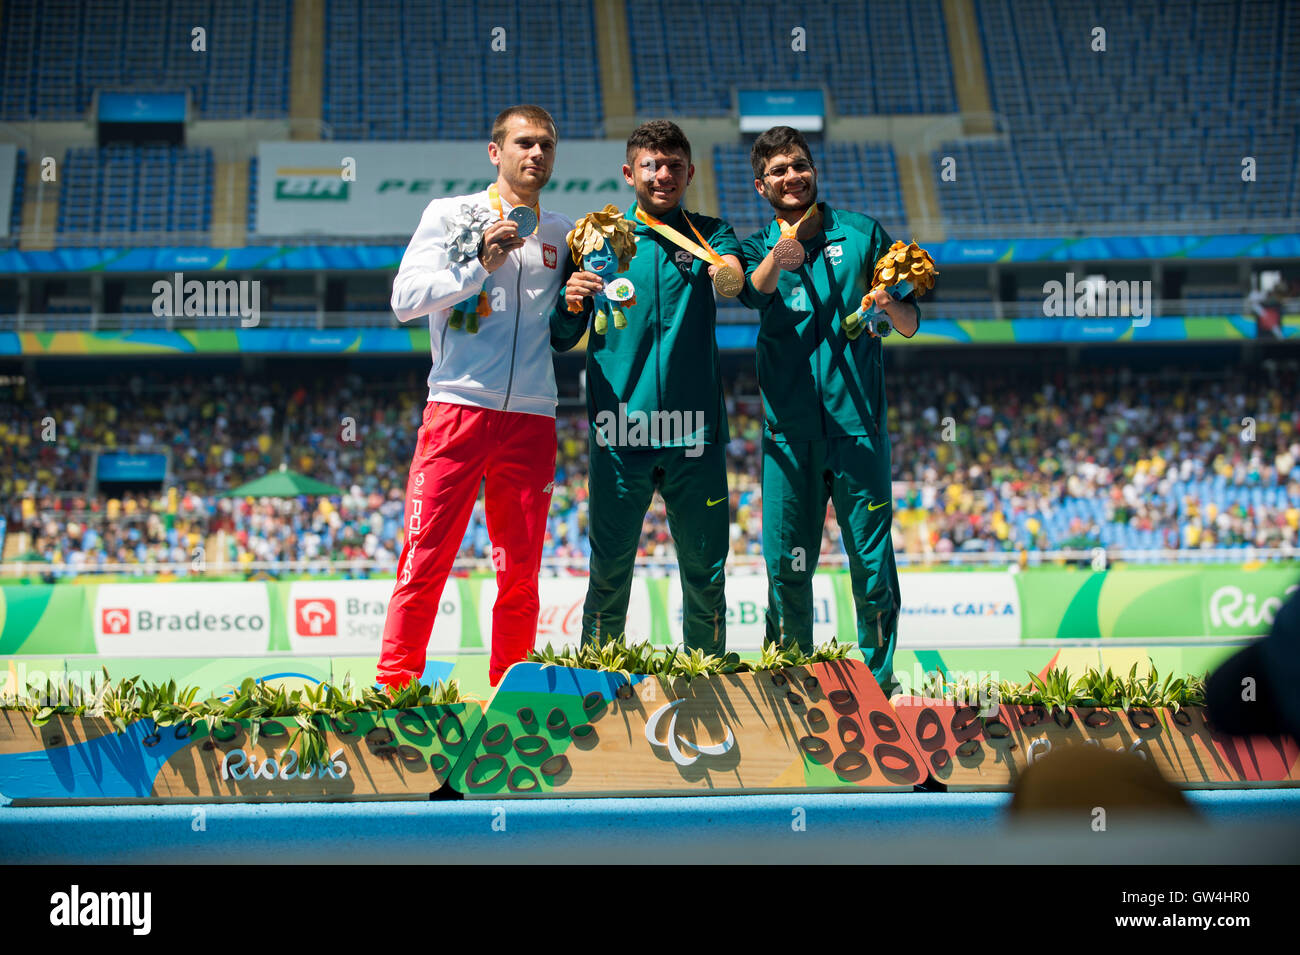 Rio De Janeiro, Brazil. 11th Sep, 2016. Podio of male 100m T47, Petrucio FERREIRA DOS SANTOS (BRA), gold medal; Derus Michal (POL), silver medal and BIRTH Yohansson (BRA) bronze medal during the Athletics Paralimpíada 2016 held at the Olympic Stadium (Engenhão). Credit:  Celso Pupo/FotoArena/Alamy Live News Stock Photo